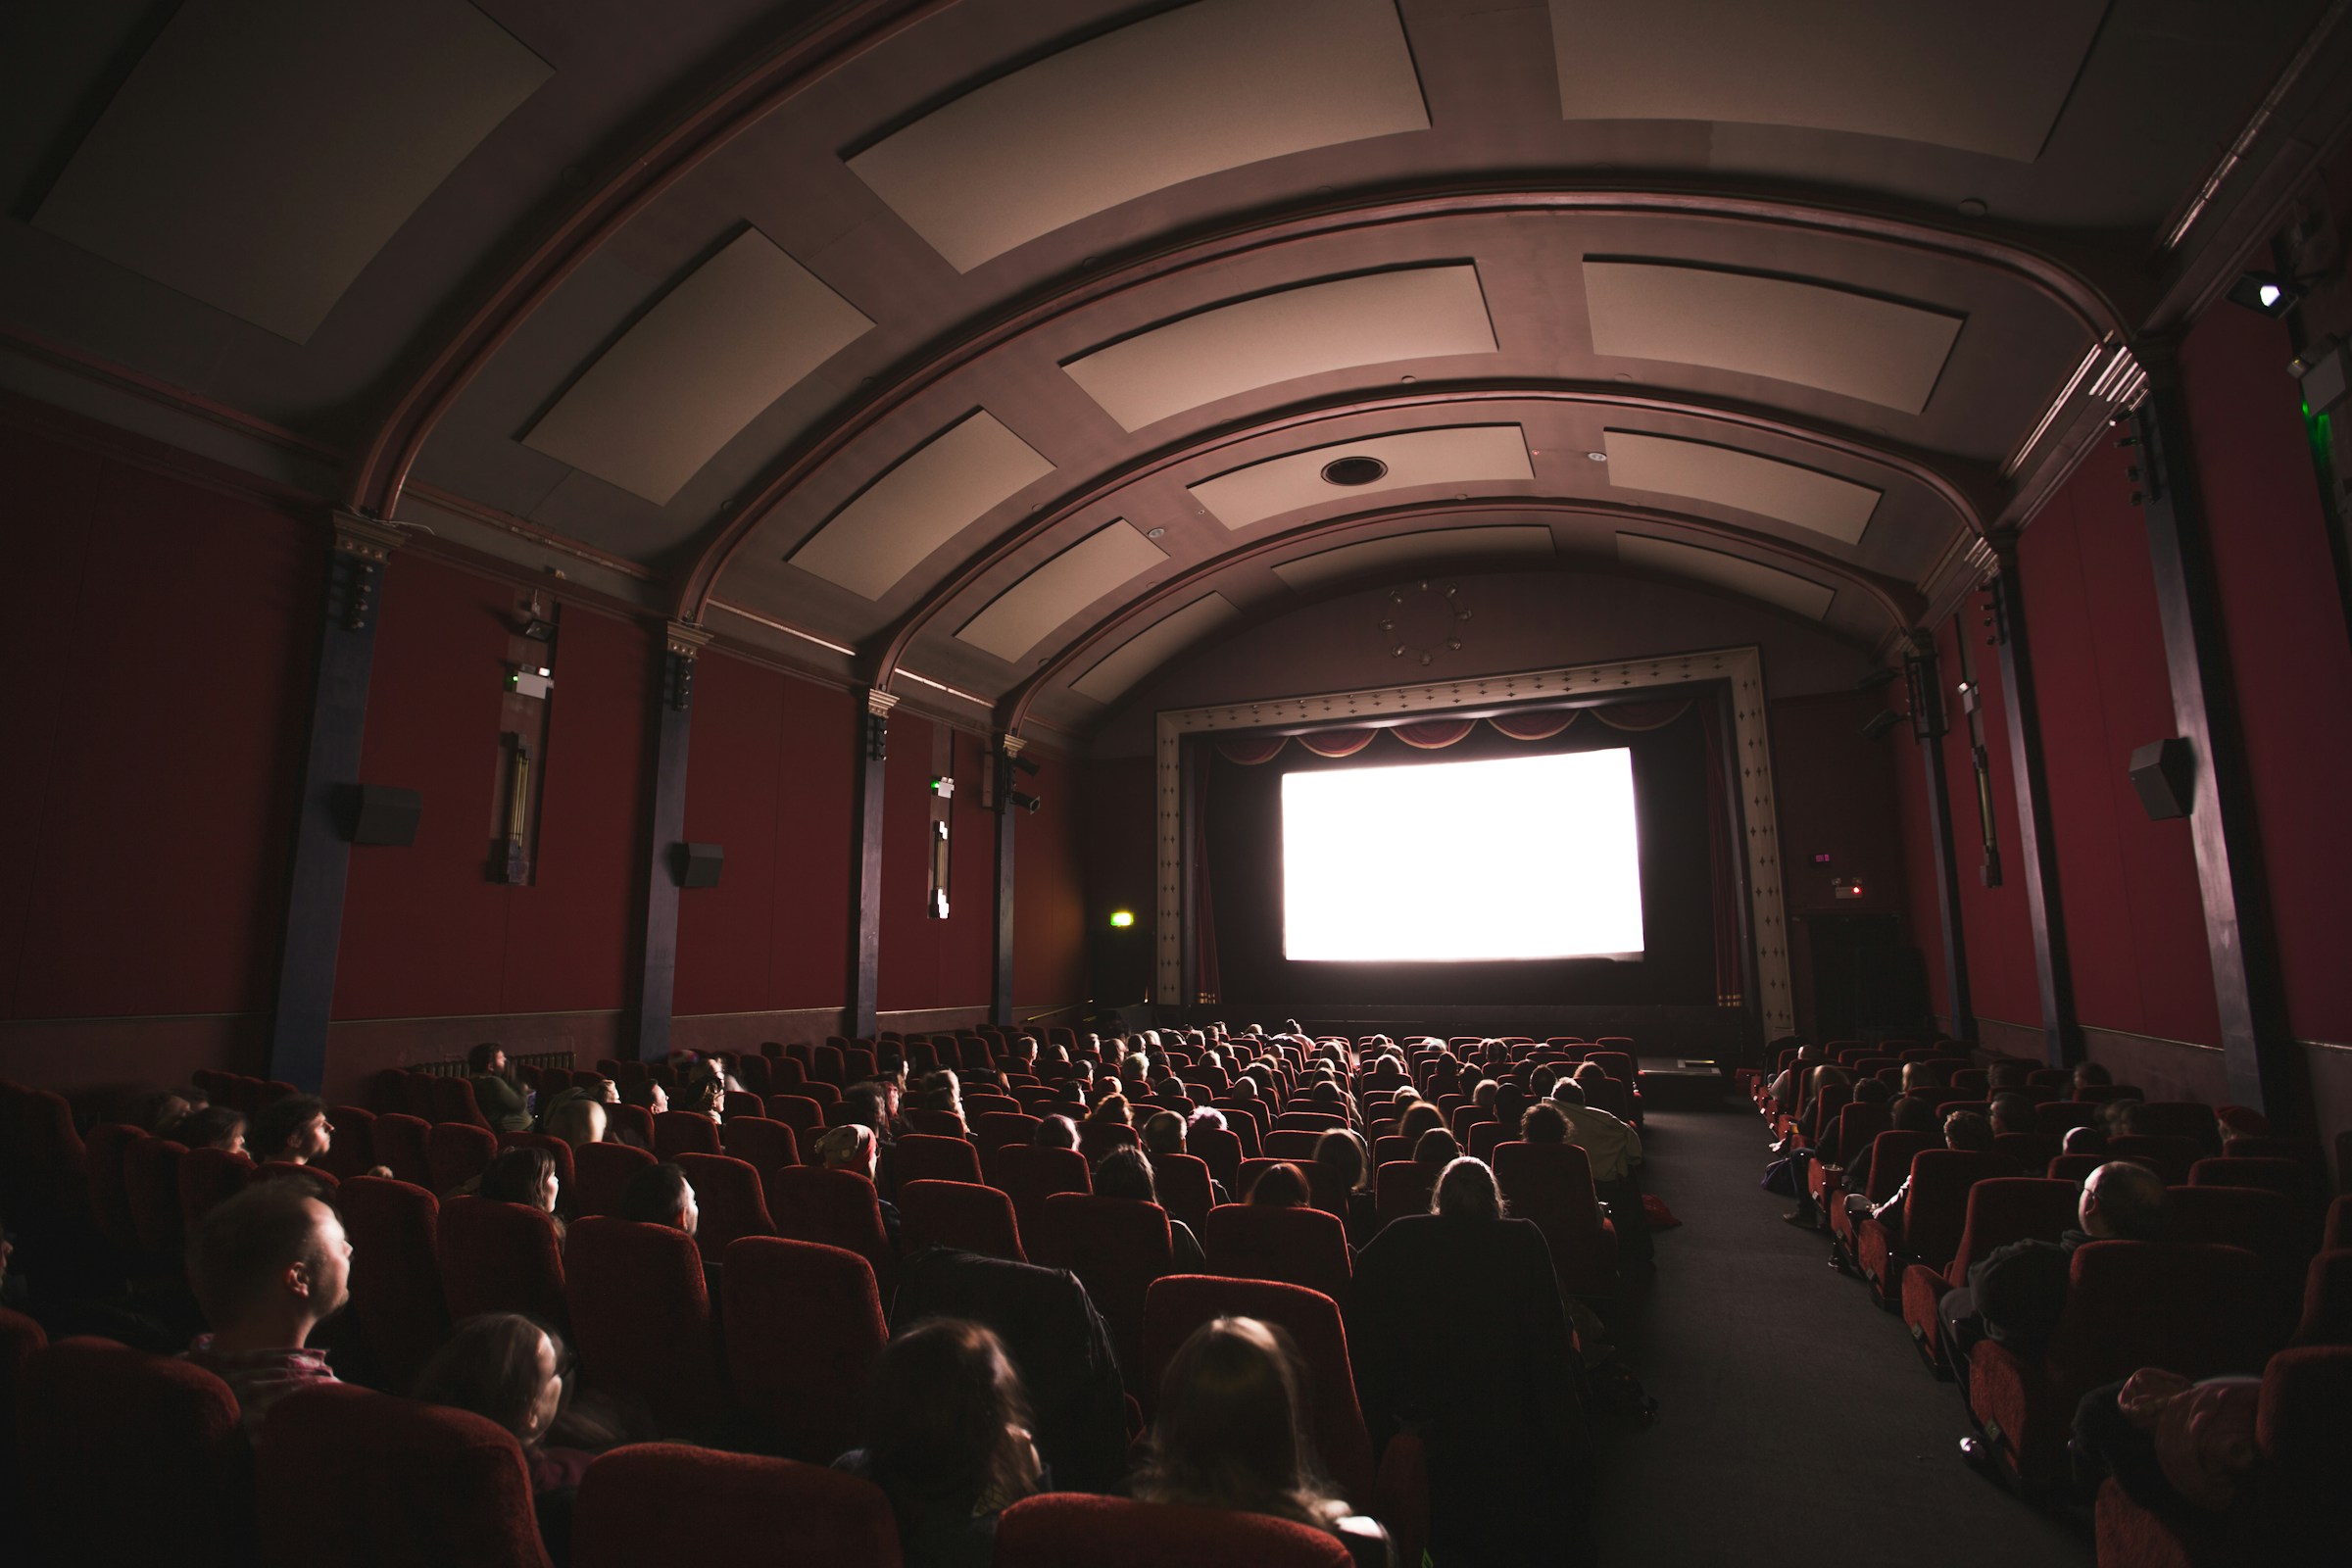 A crowd of people at a movie theater | Source: Unsplash